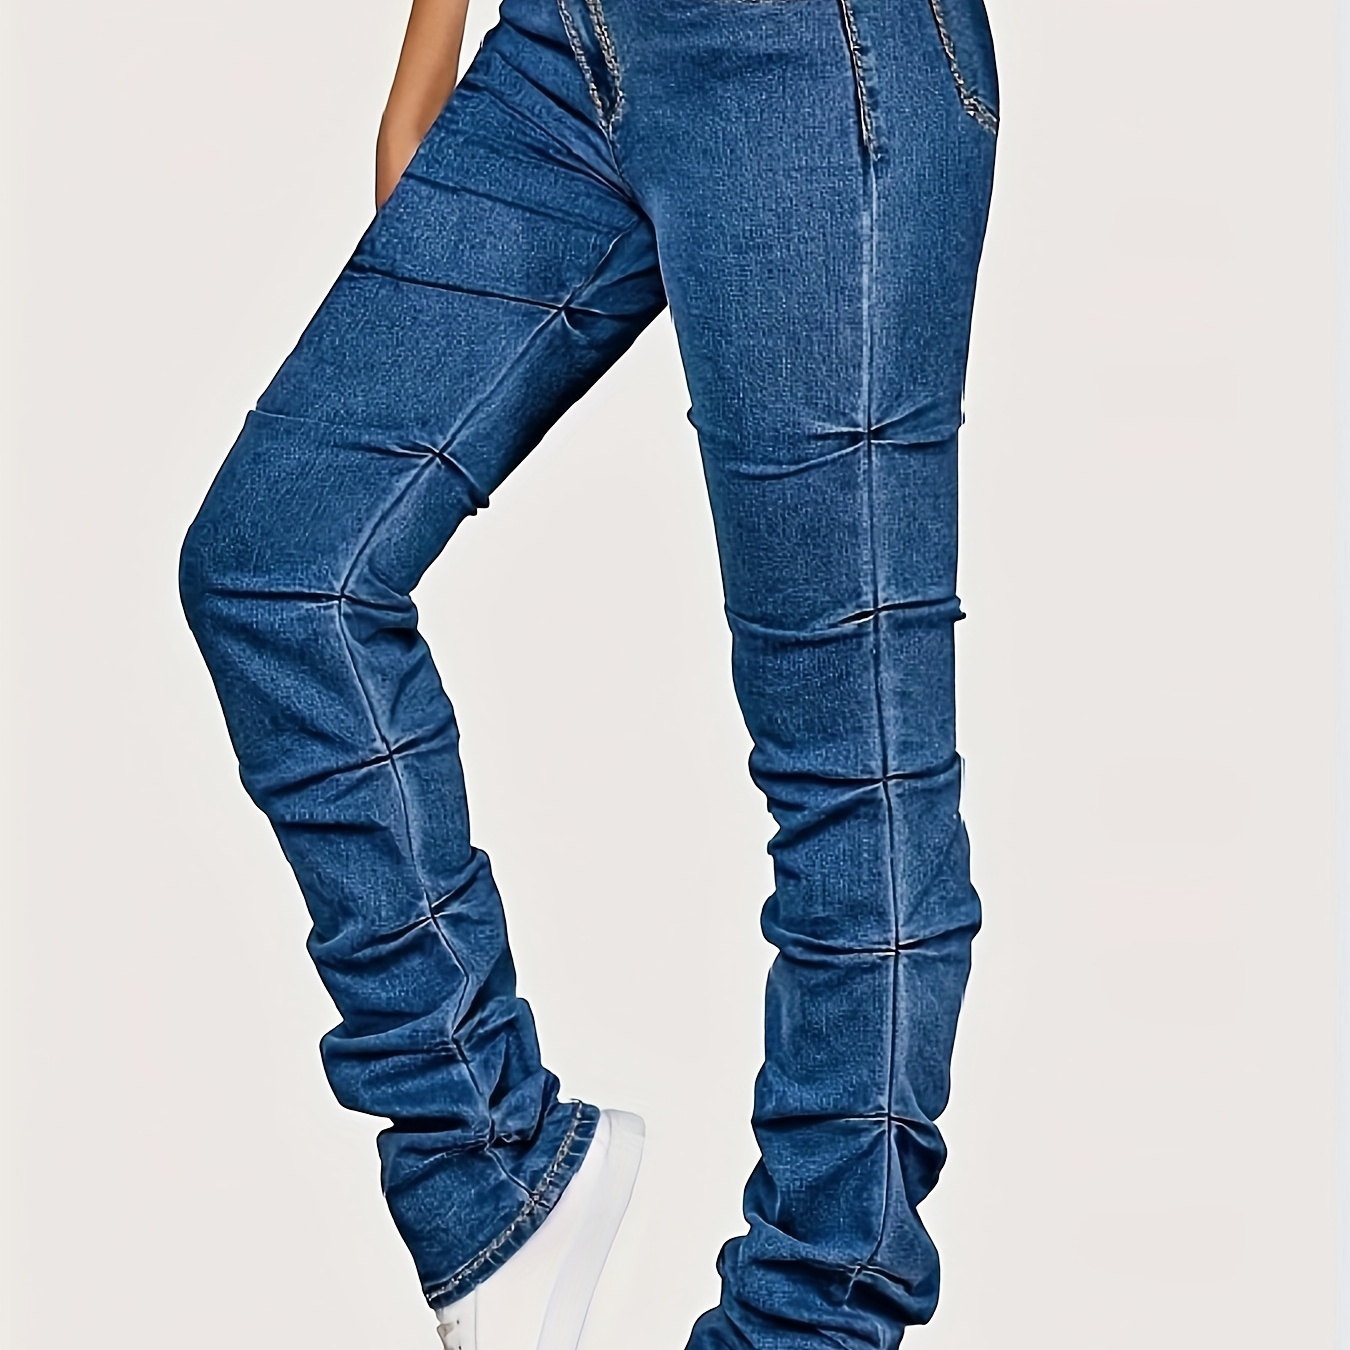 

Plain High Rise Stacked Jeans, High Stretch Washed Blue Ruched Casual Denim Pants, Women's Denim Jeans & Clothing